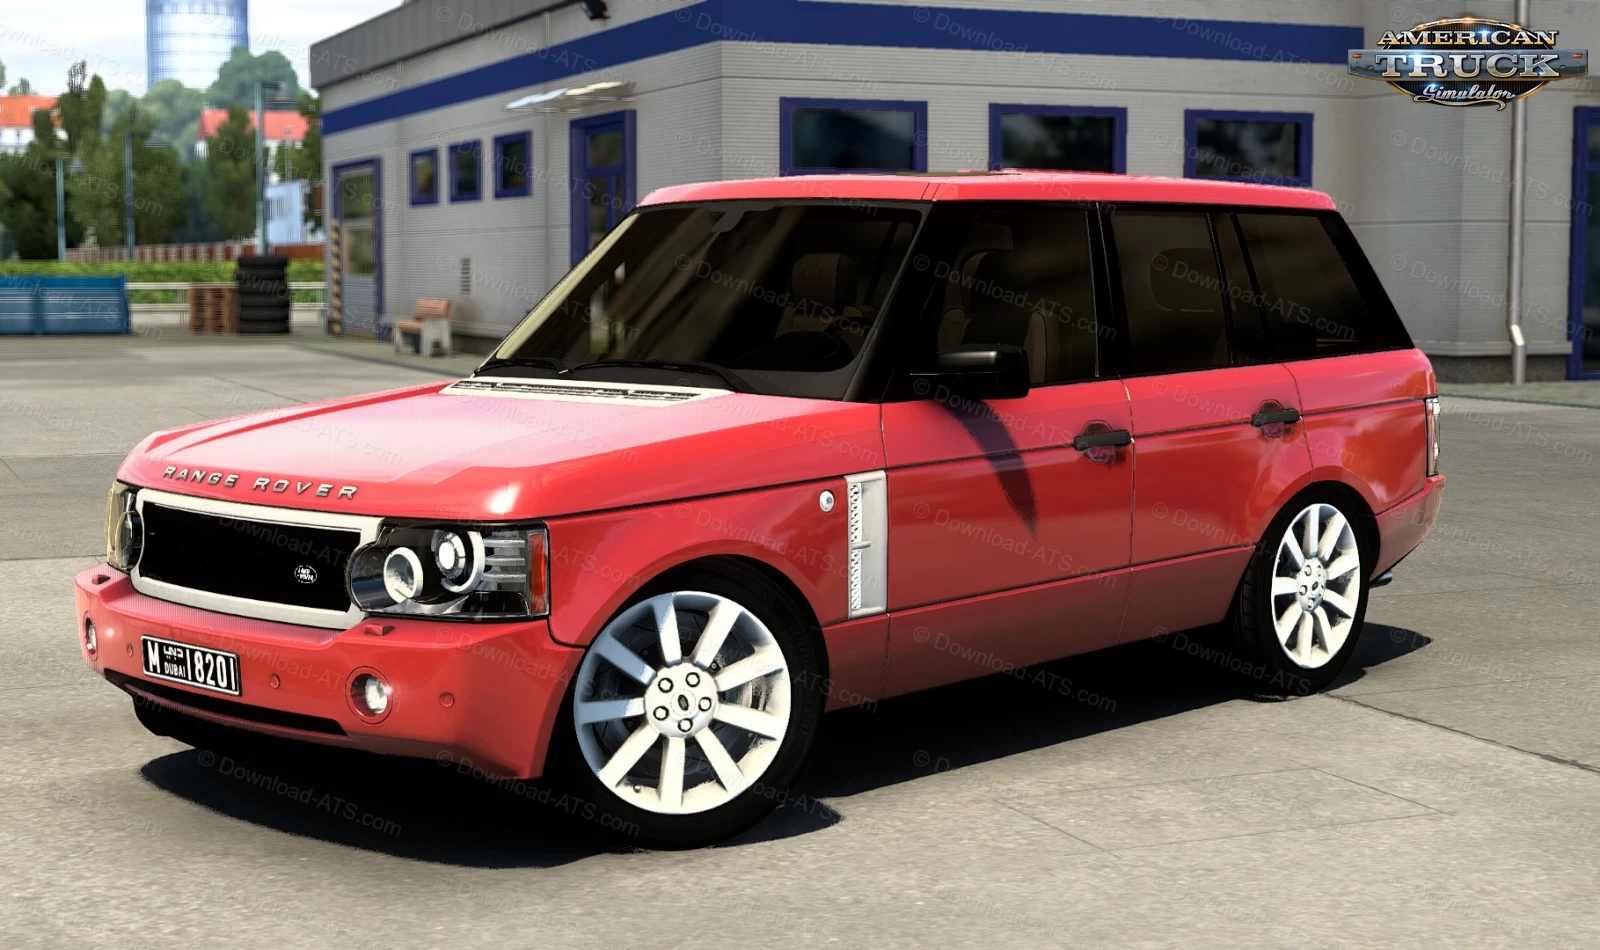 Range Rover Supercharged 2008 v7.5 (1.46.x) for ATS